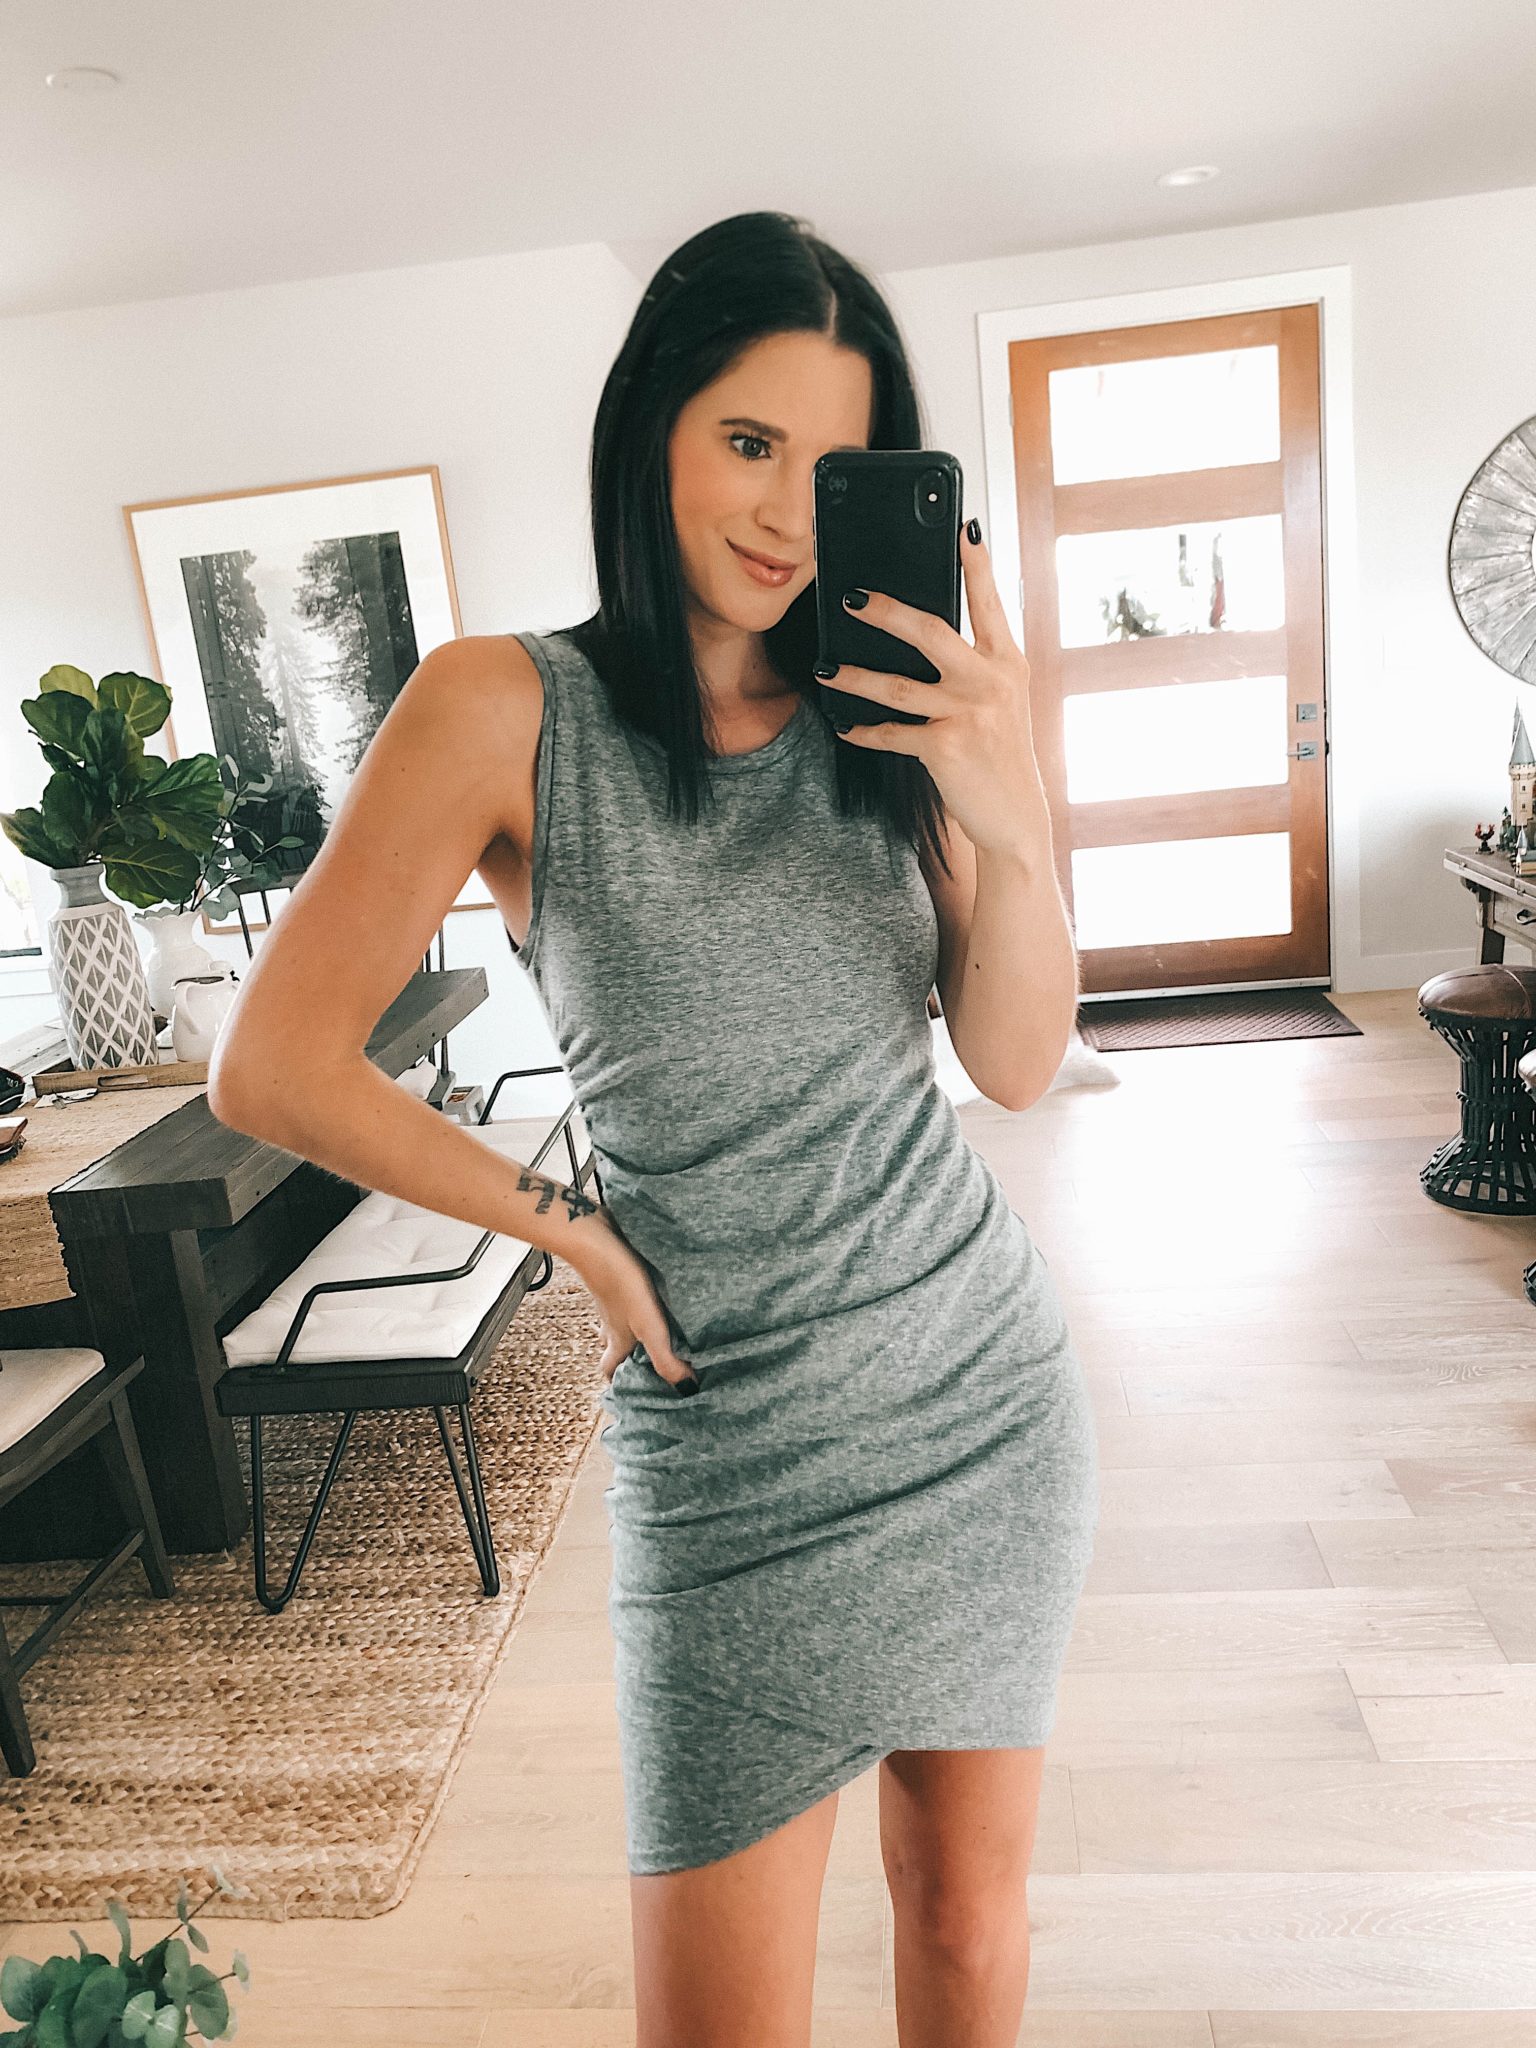 Sale Alert - Two Must Have Versatile Dresses for Summer by popular Austin fashion blog, Dressed to Kill: image of a woman wearing a dark grey Leith Ruched Body-Con Tank Dress